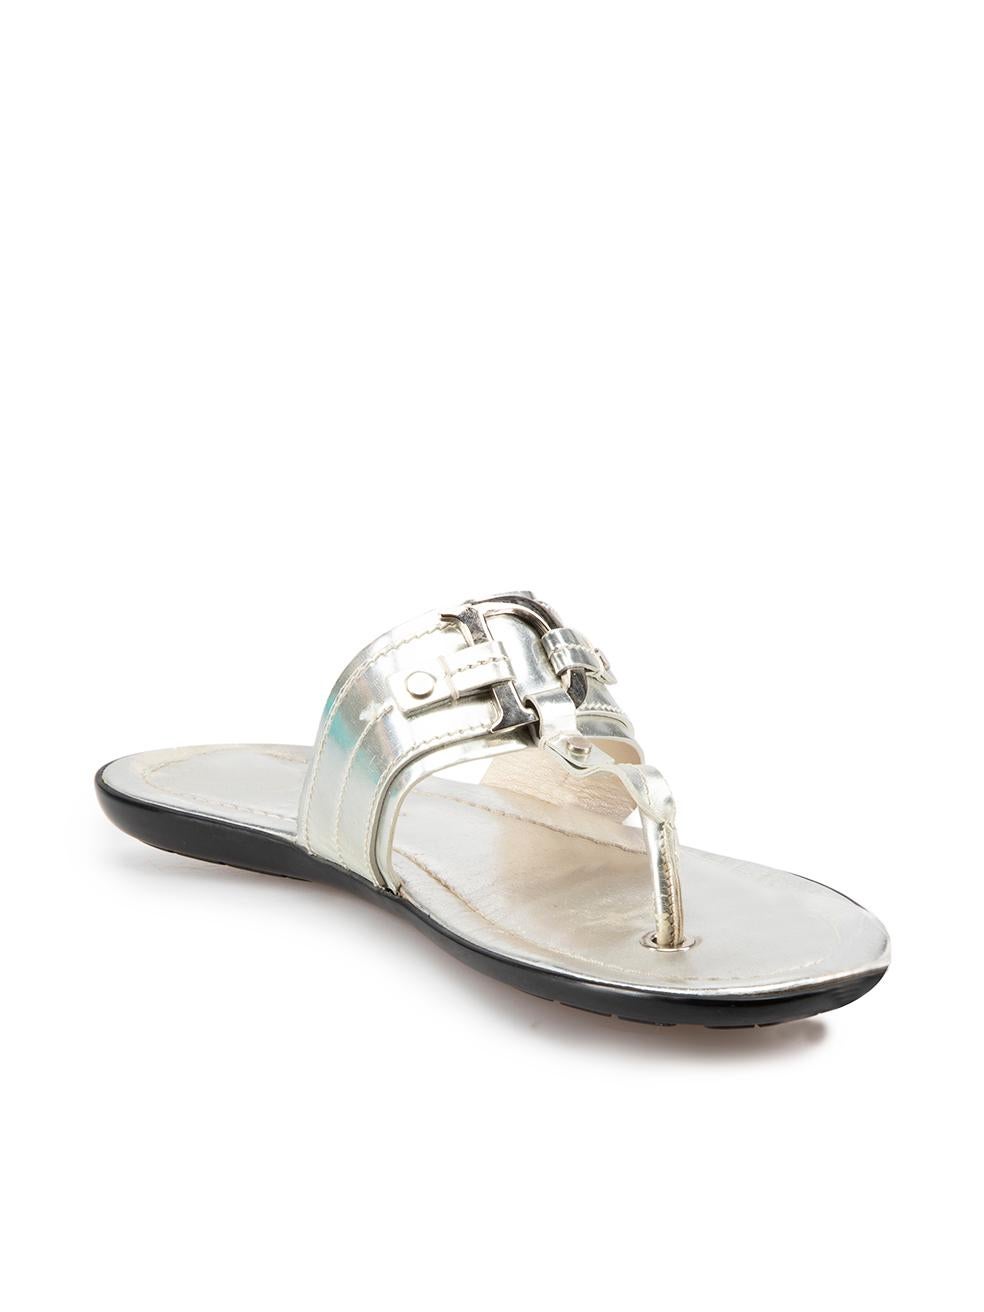 CONDITION is Very good. Minimal wear to sandals is evident. Minimal wear found though noticeable abrasion to surface coating at insole and toe strap on this used Dior designer resale item.
  
Details
Silver
Patent leather
Sandals
Flat
Thong